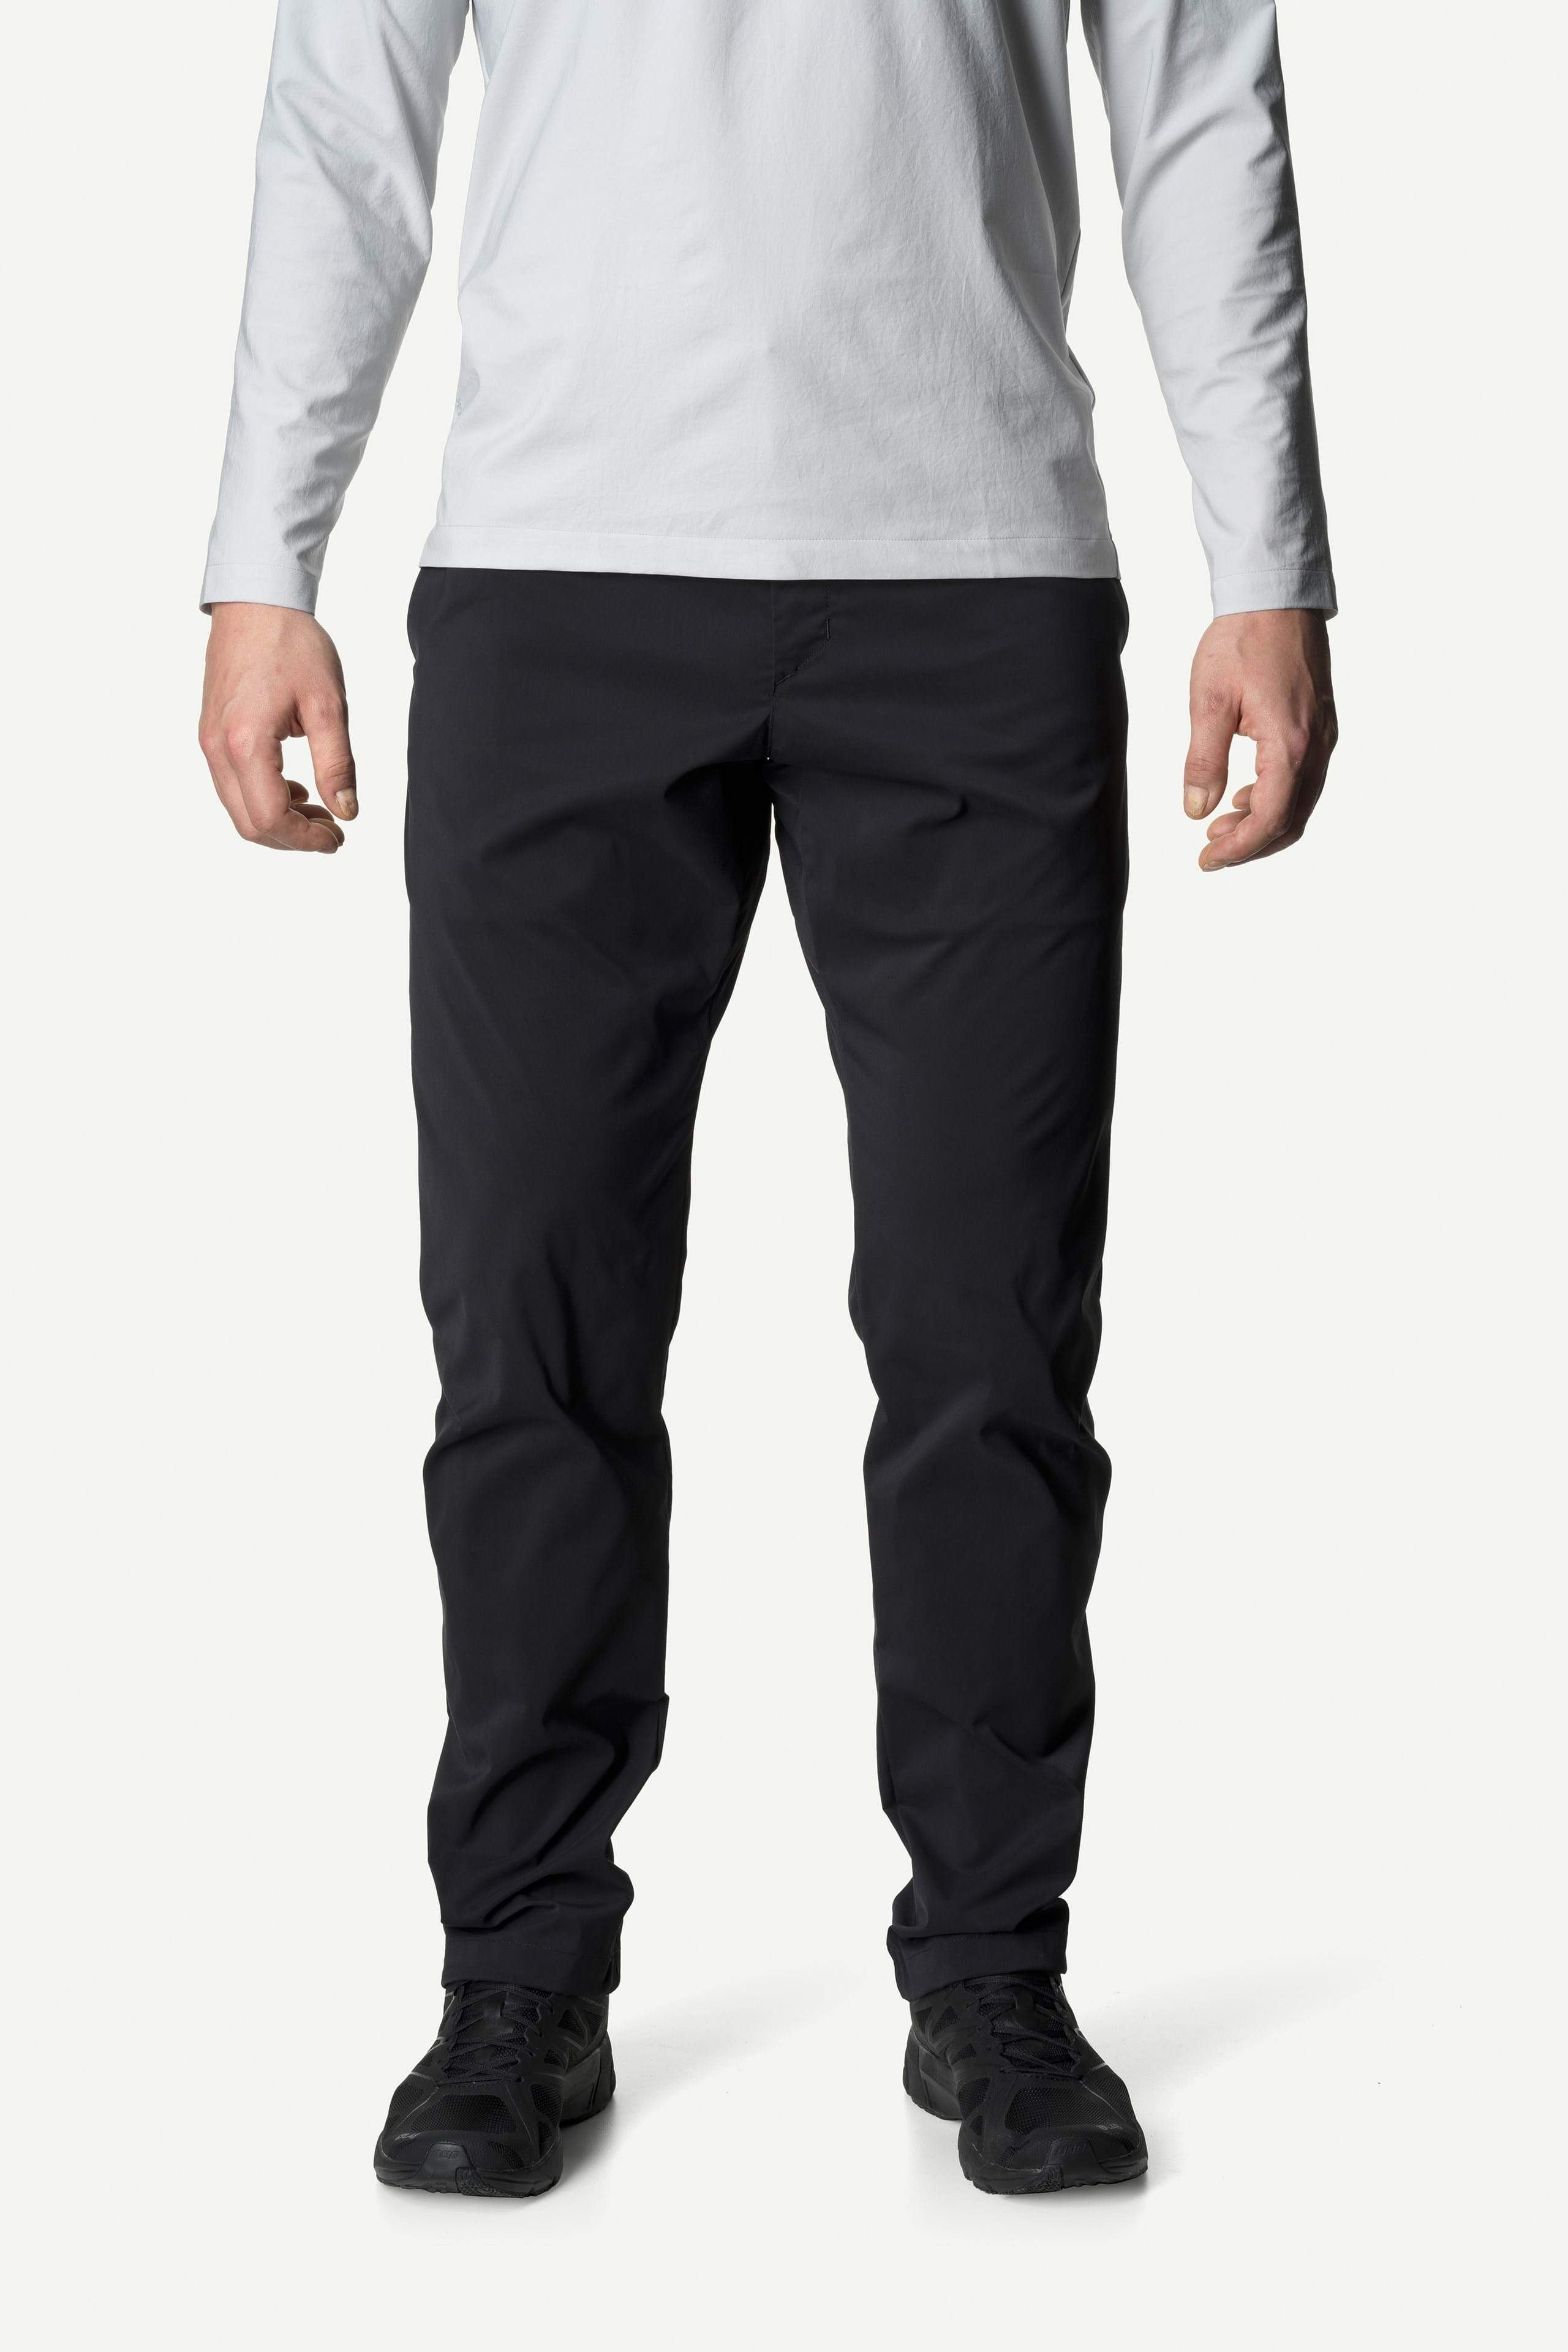 Houdini M's Omni Pants - Recycled Polyester, True Black / L